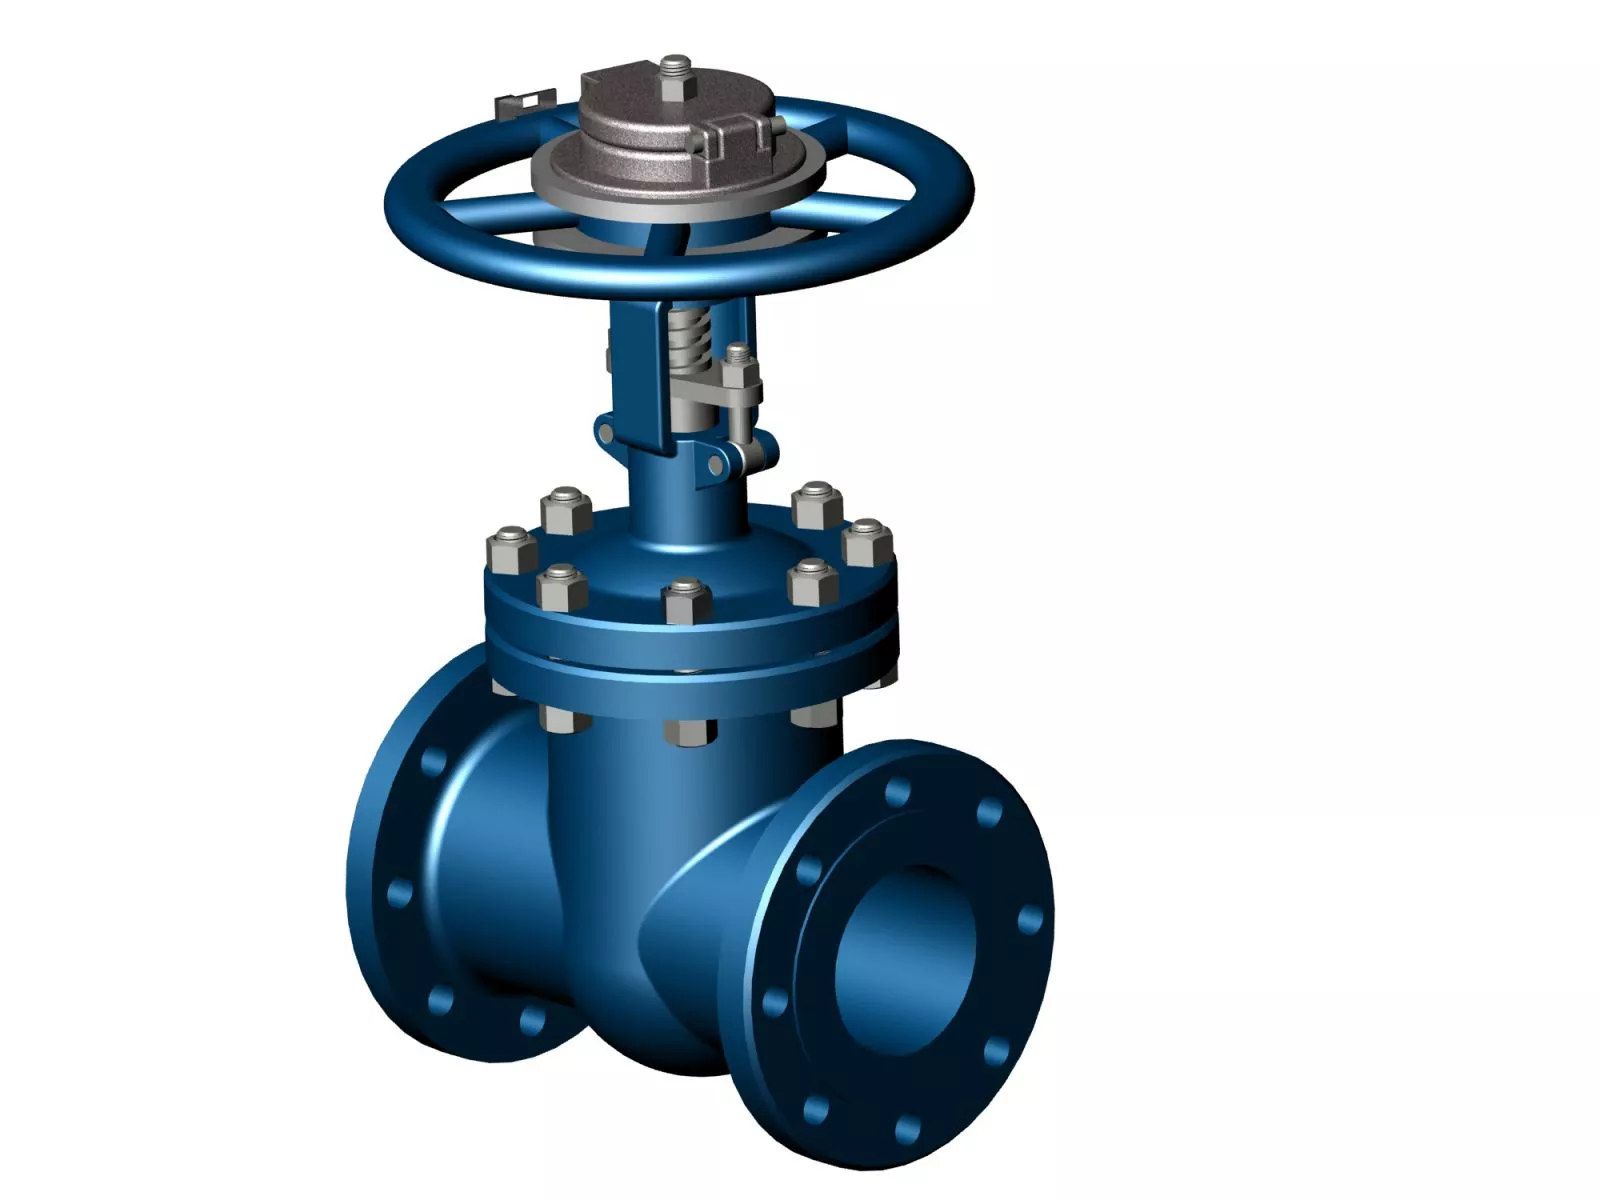 Negative Factors for Chinese Valve Industry